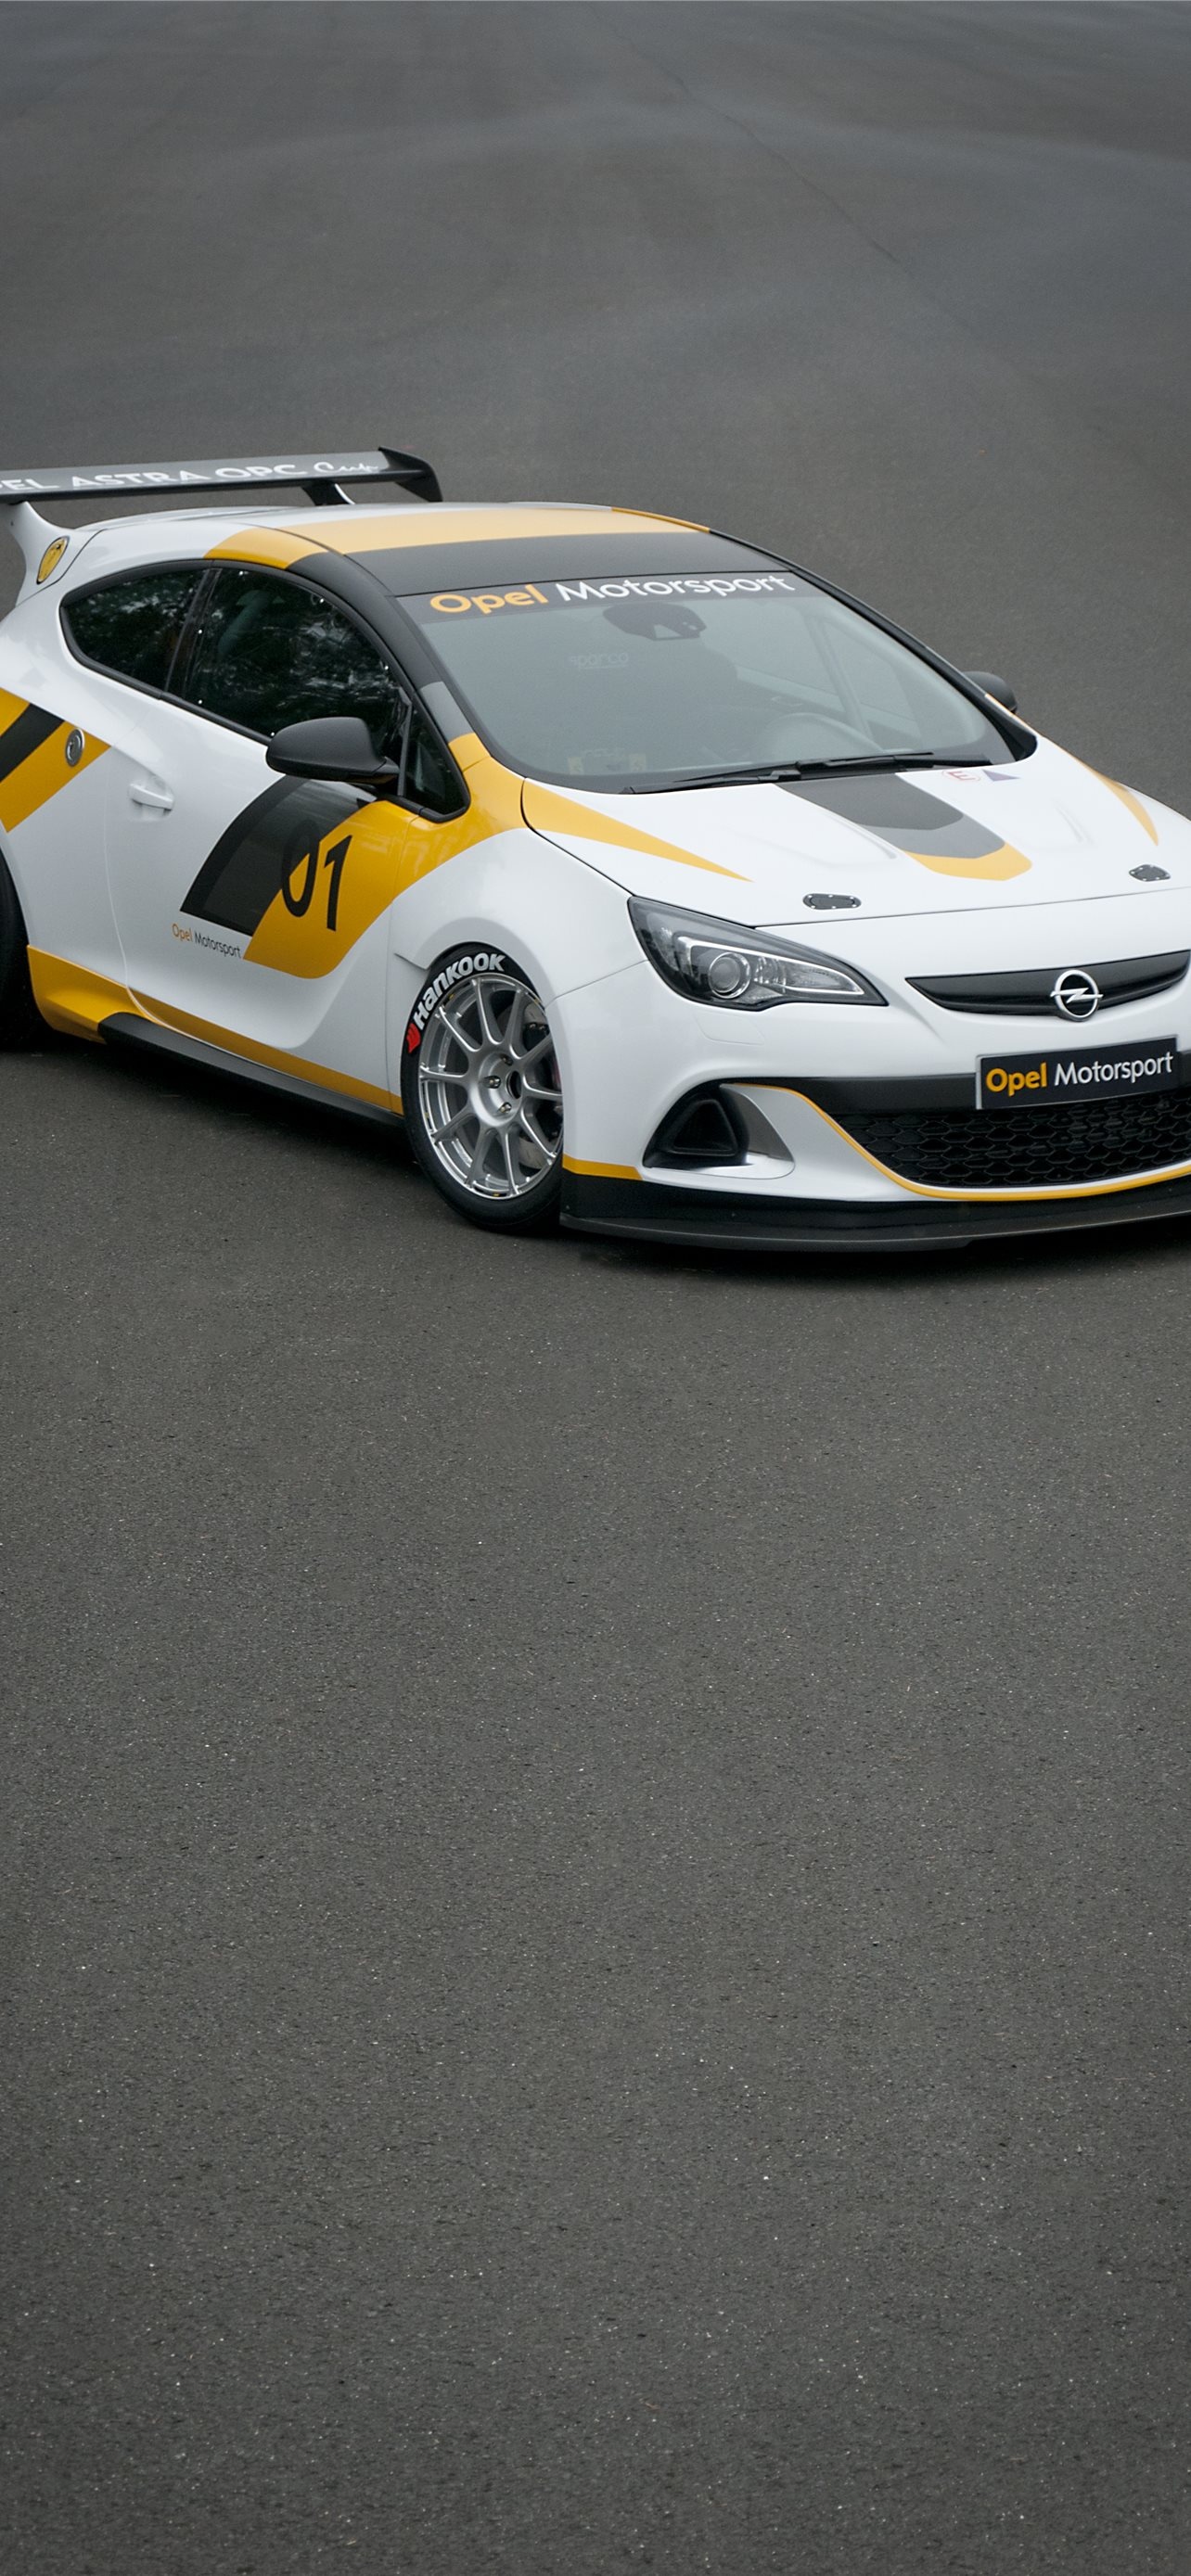 Opel Astra, Latest iPhone wallpapers, Free HD backgrounds, Stunning visuals, 1290x2780 HD Phone